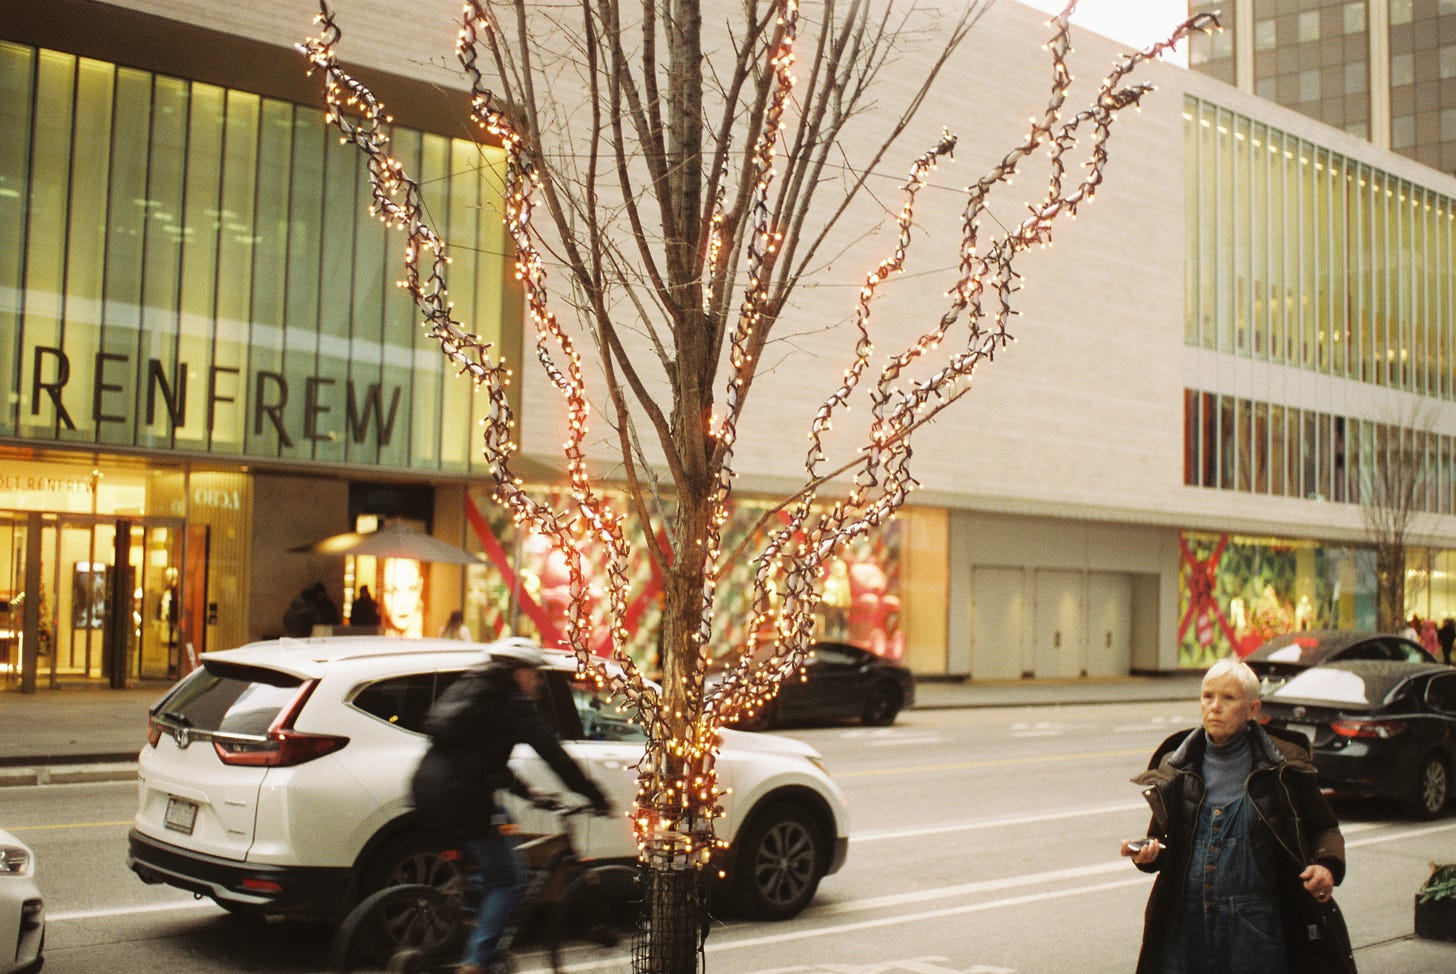 A photograph of a tree with Christmas lights on a busy street, and in the foreground right side a woman is walking down the sidewalk.